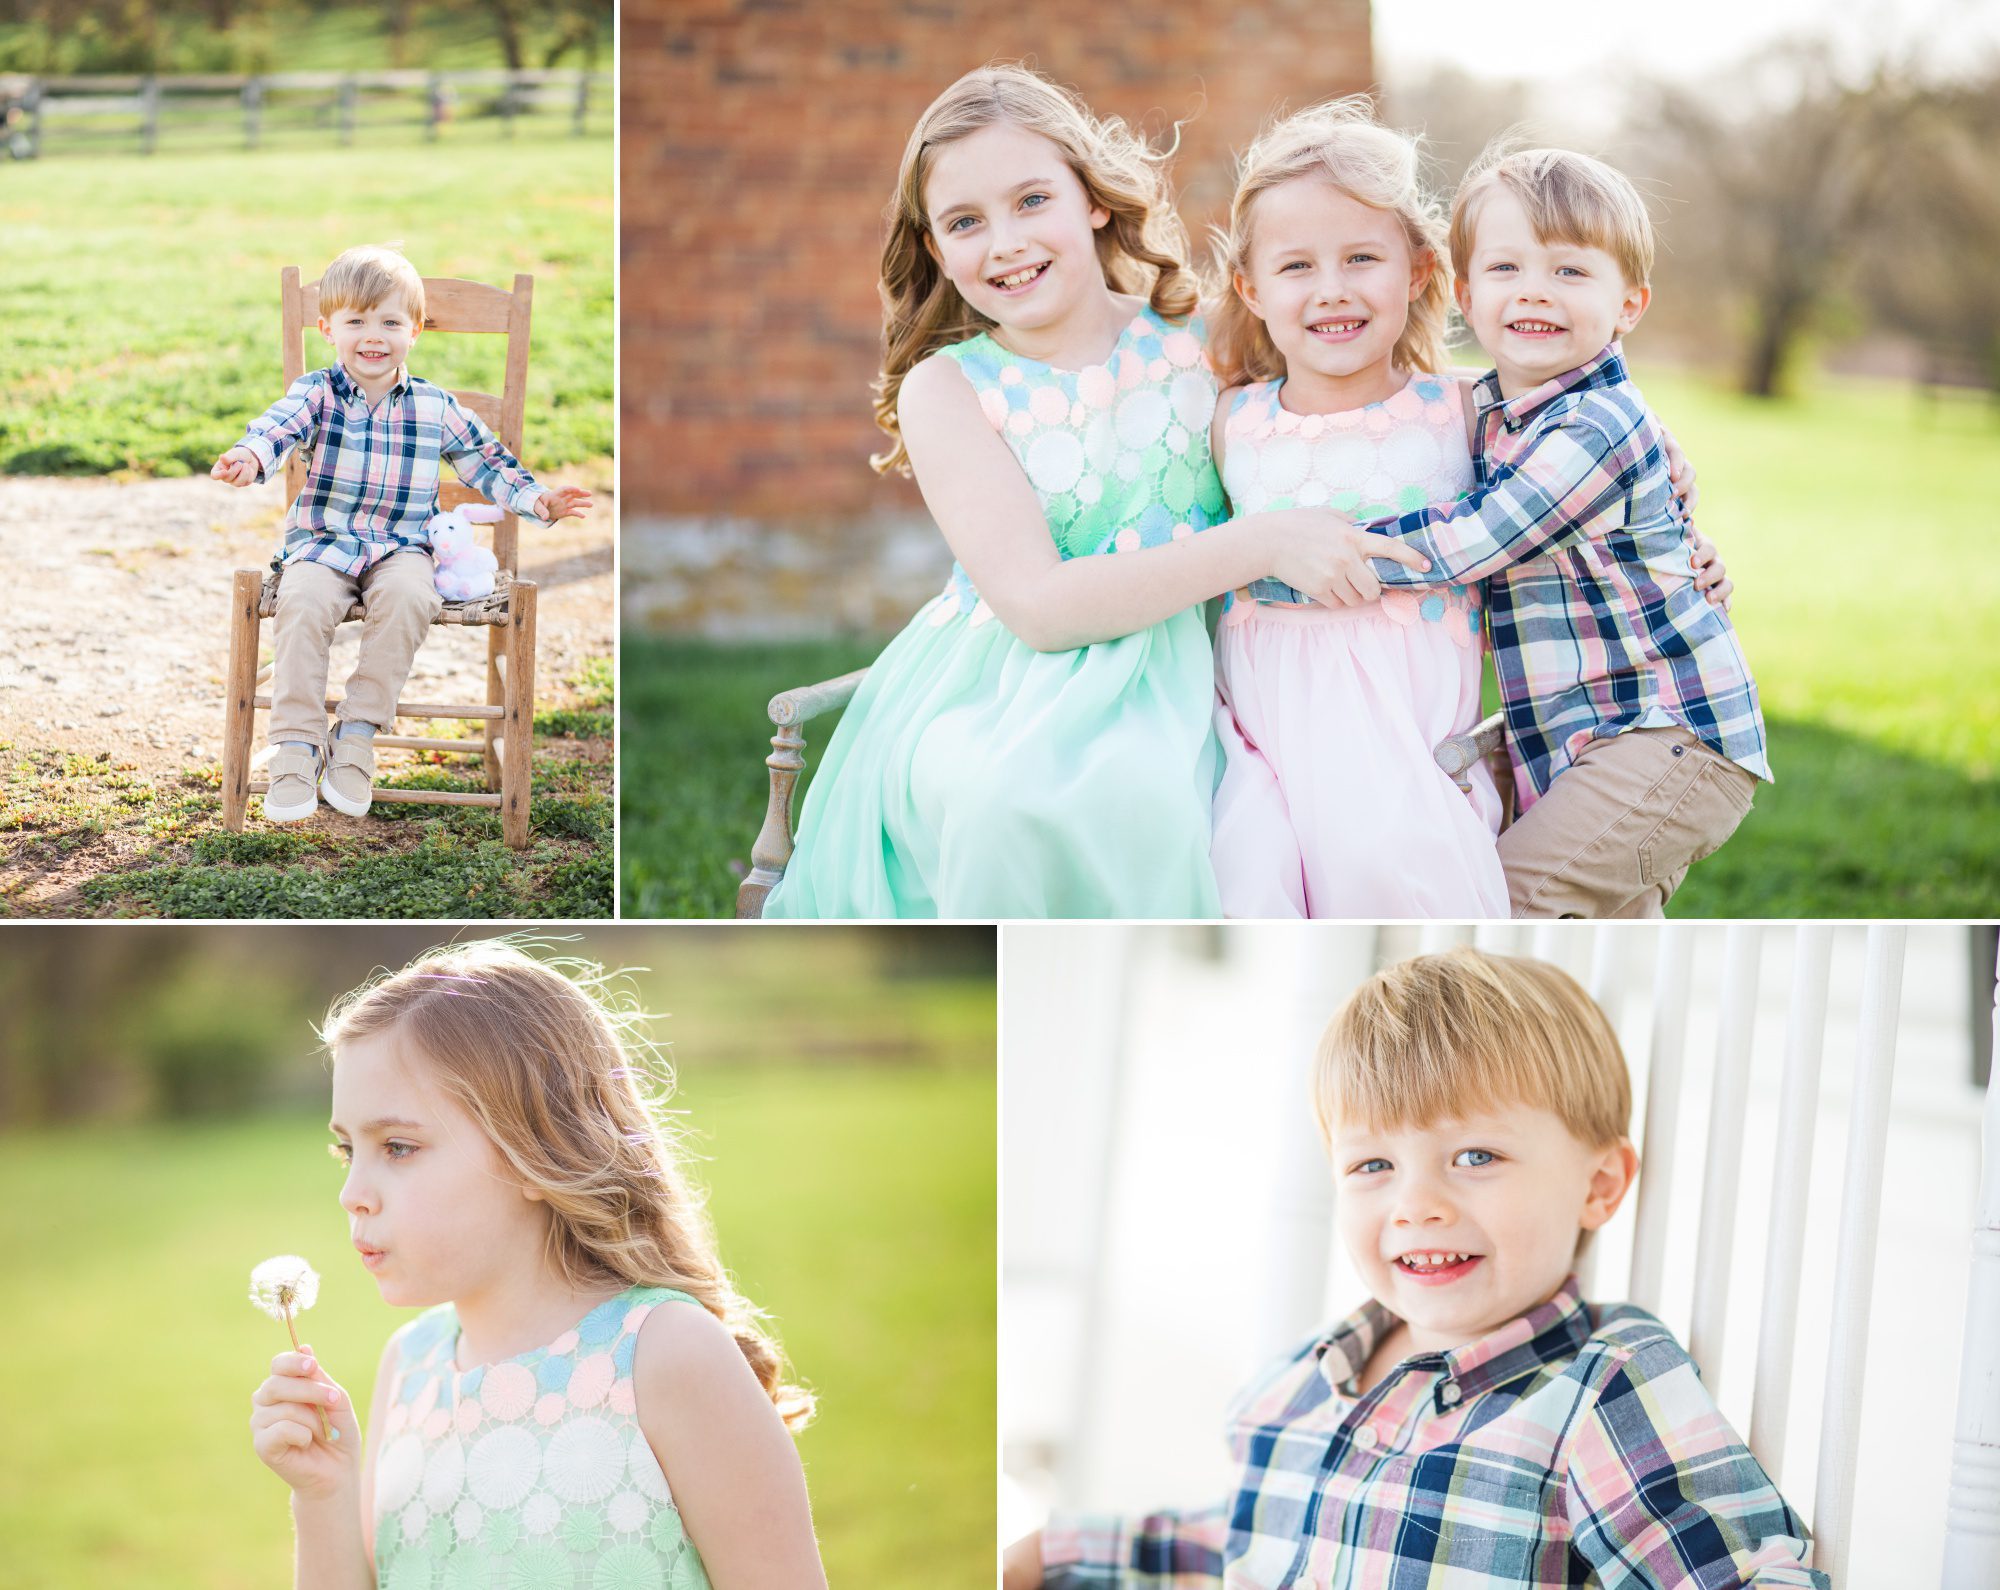 Outdoor spring photography session with kids at Ravenswood Mansion in Brentwood TN. Photo by Krista Lee Photography, Franklin TN